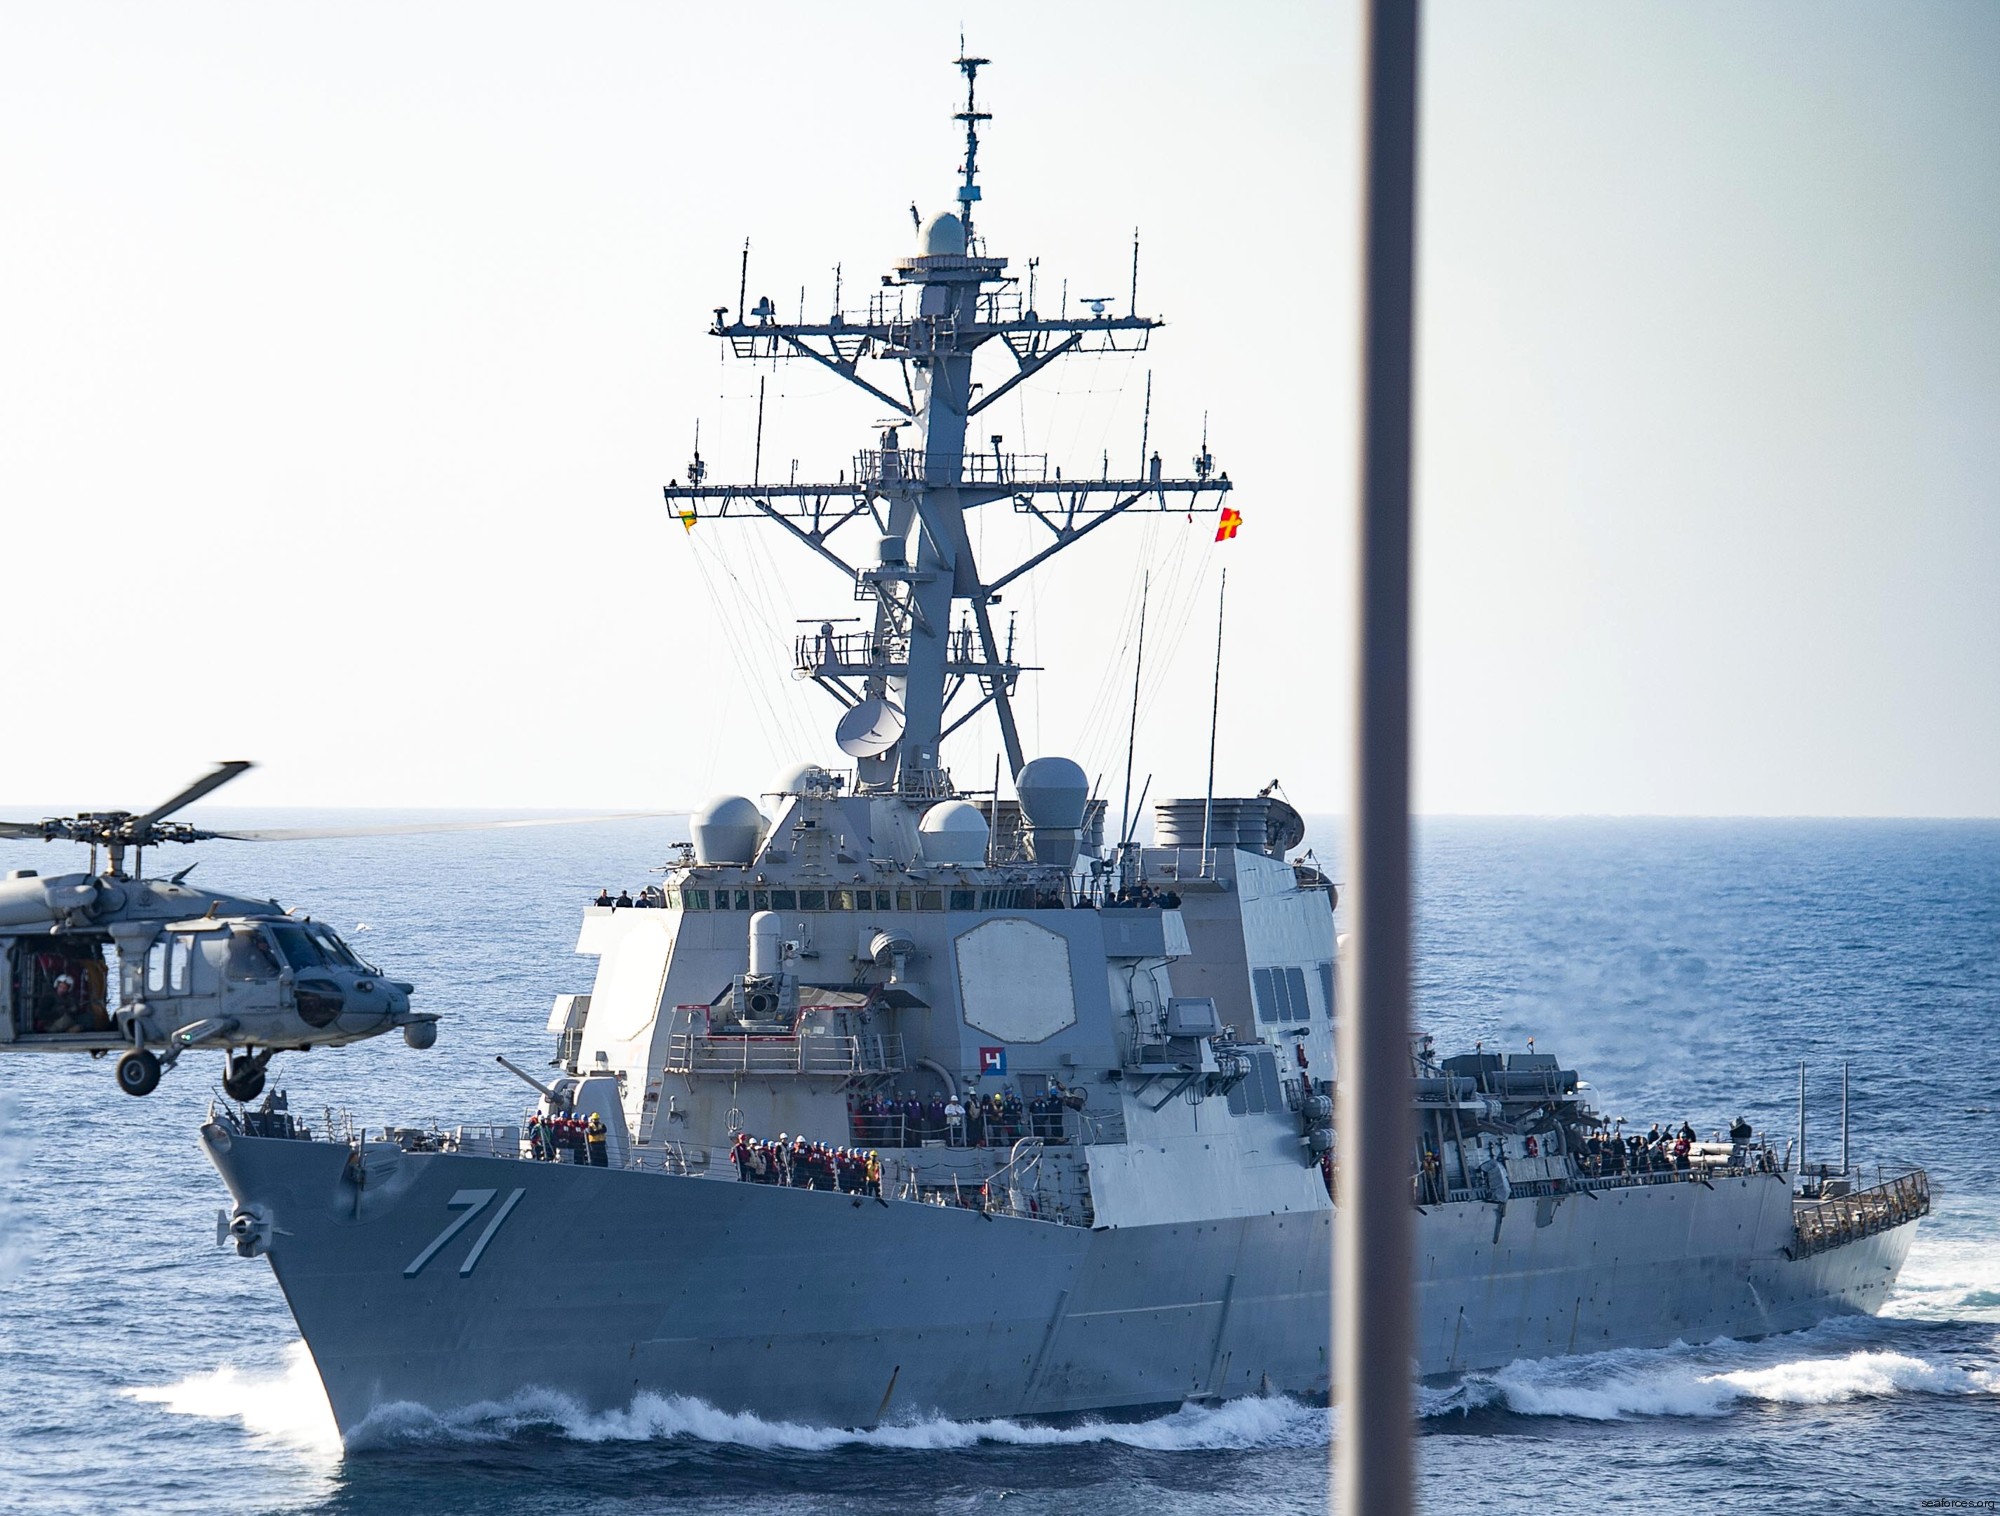 ddg-71 uss ross guided missile destroyer arleigh burke class aegis bmd 05